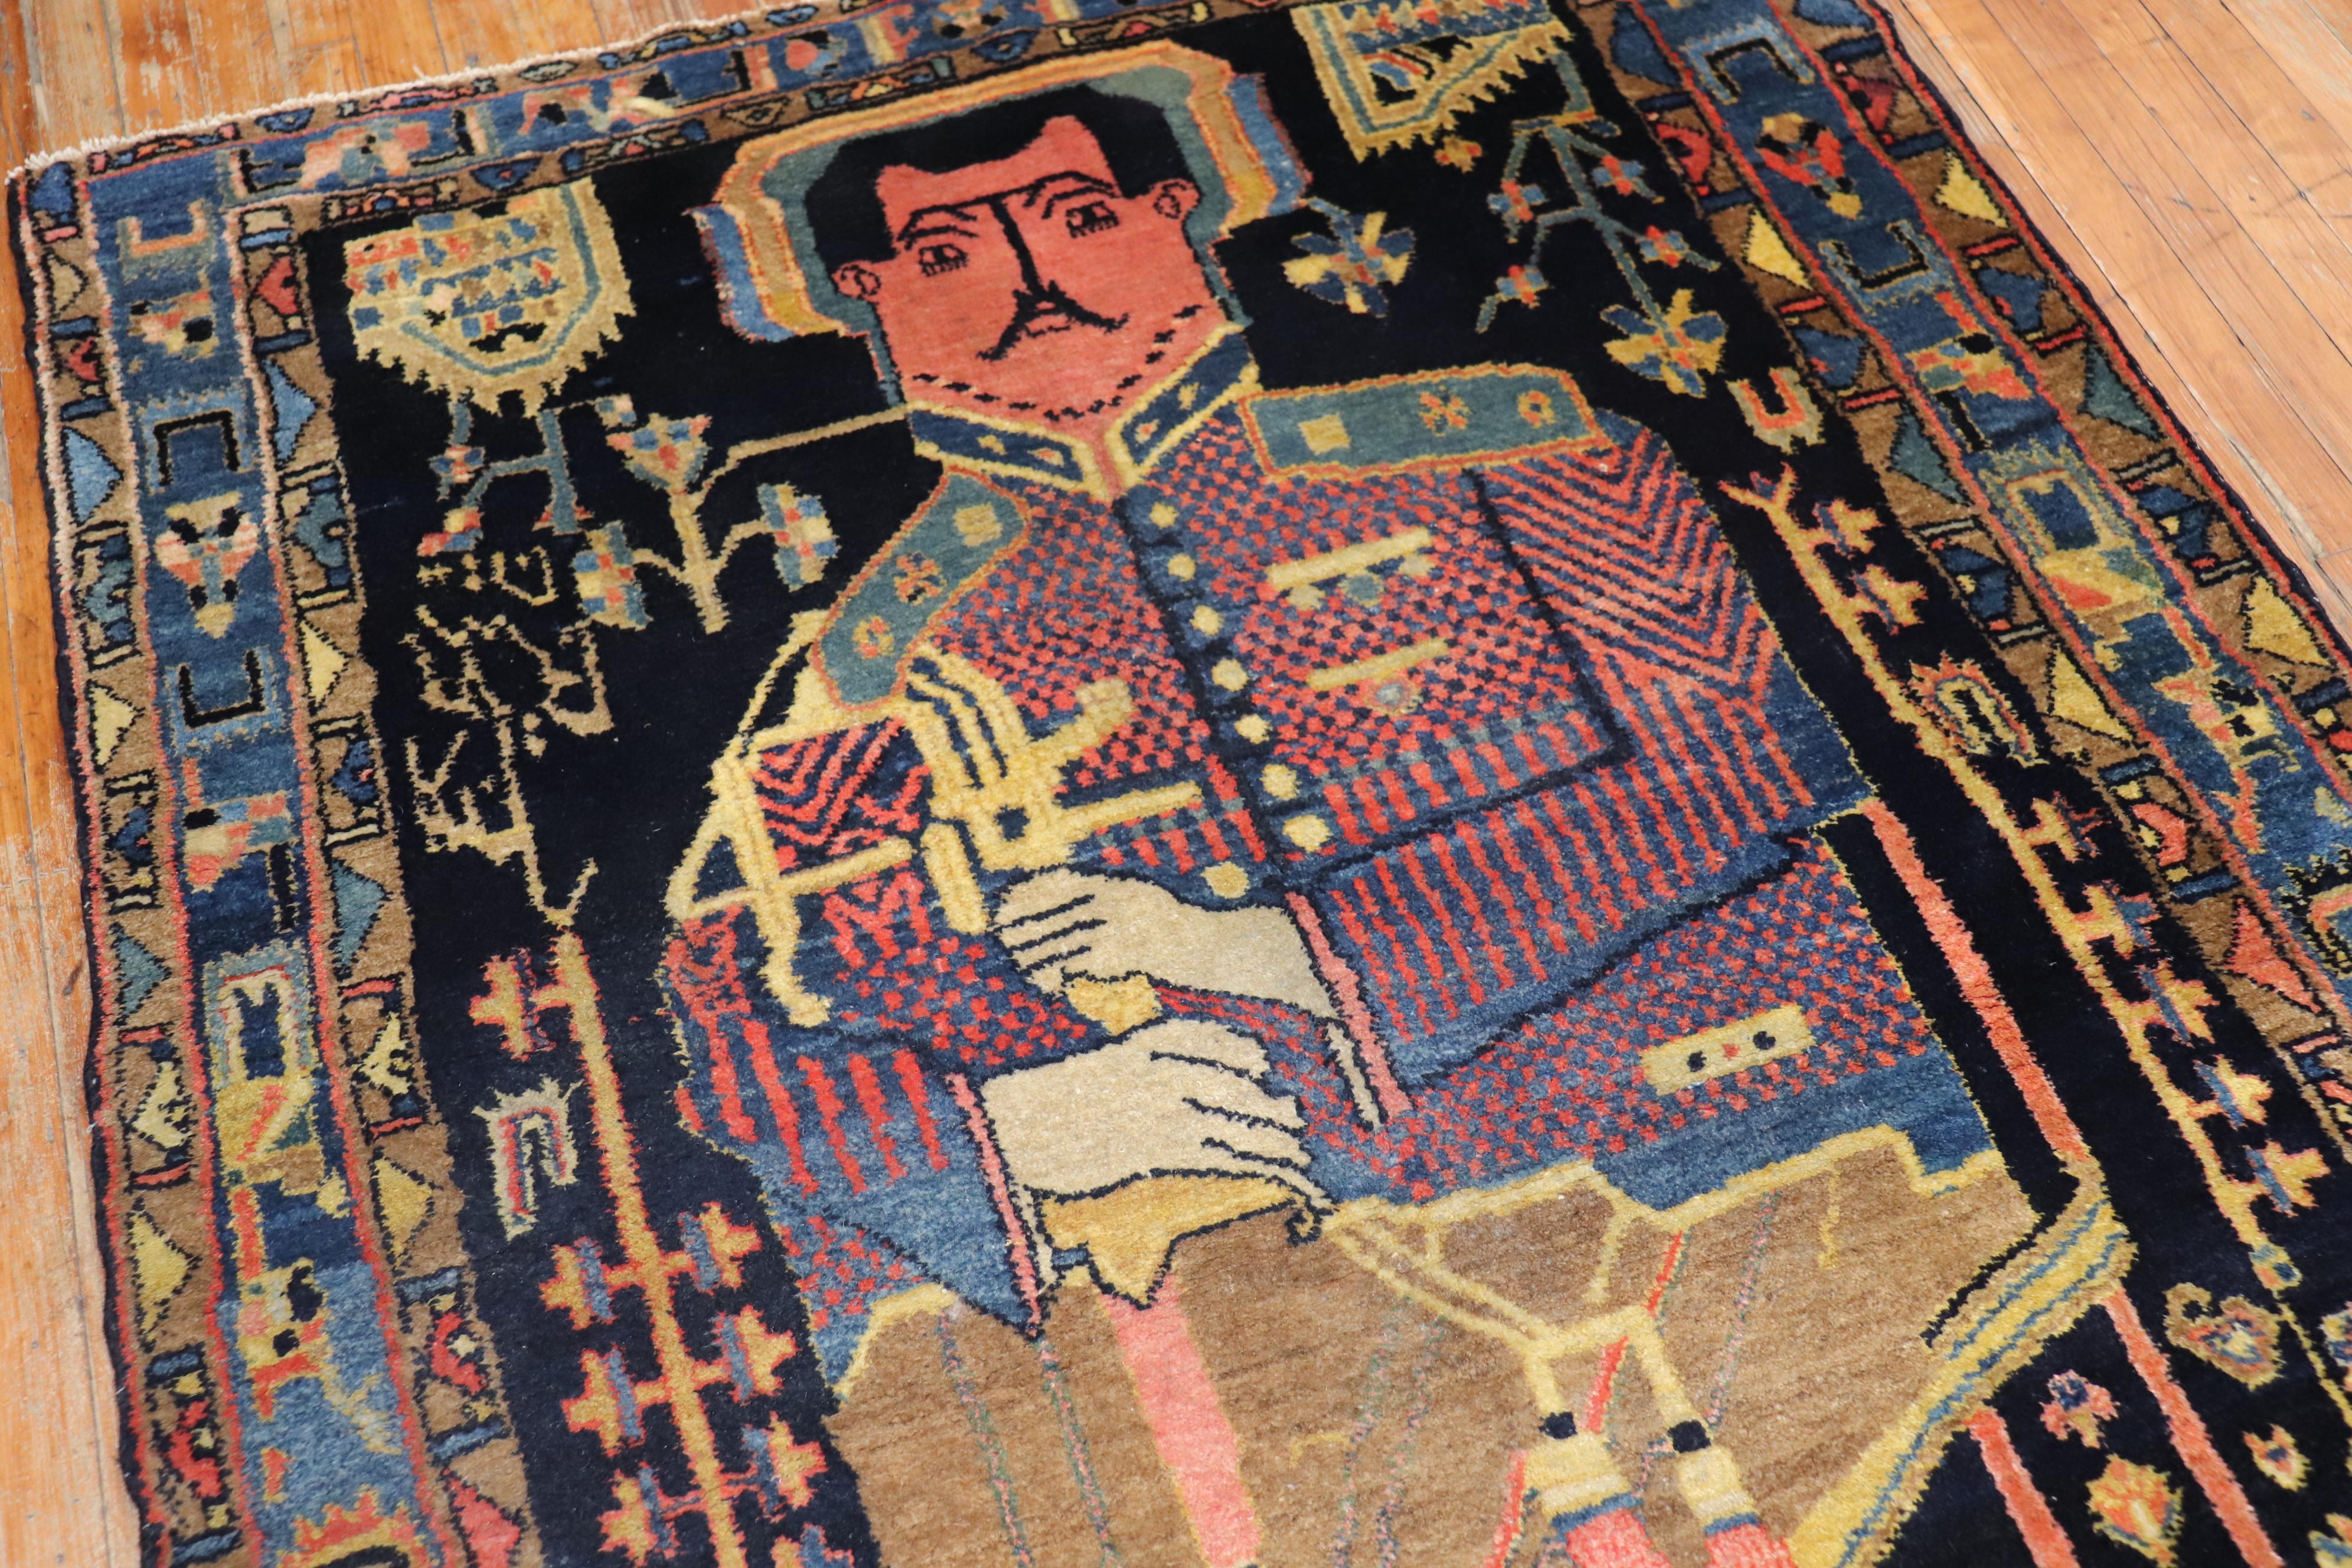 A mid-20th century Persian Kurd rug depicting a Colonel Mohammad Taqi-Khan Pessian (1892-3 October 1921), also spelled as Pesyan and Pesseyan, who was an Iranian gendarme and pilot who formed and lead the short-lived Autonomous Government of